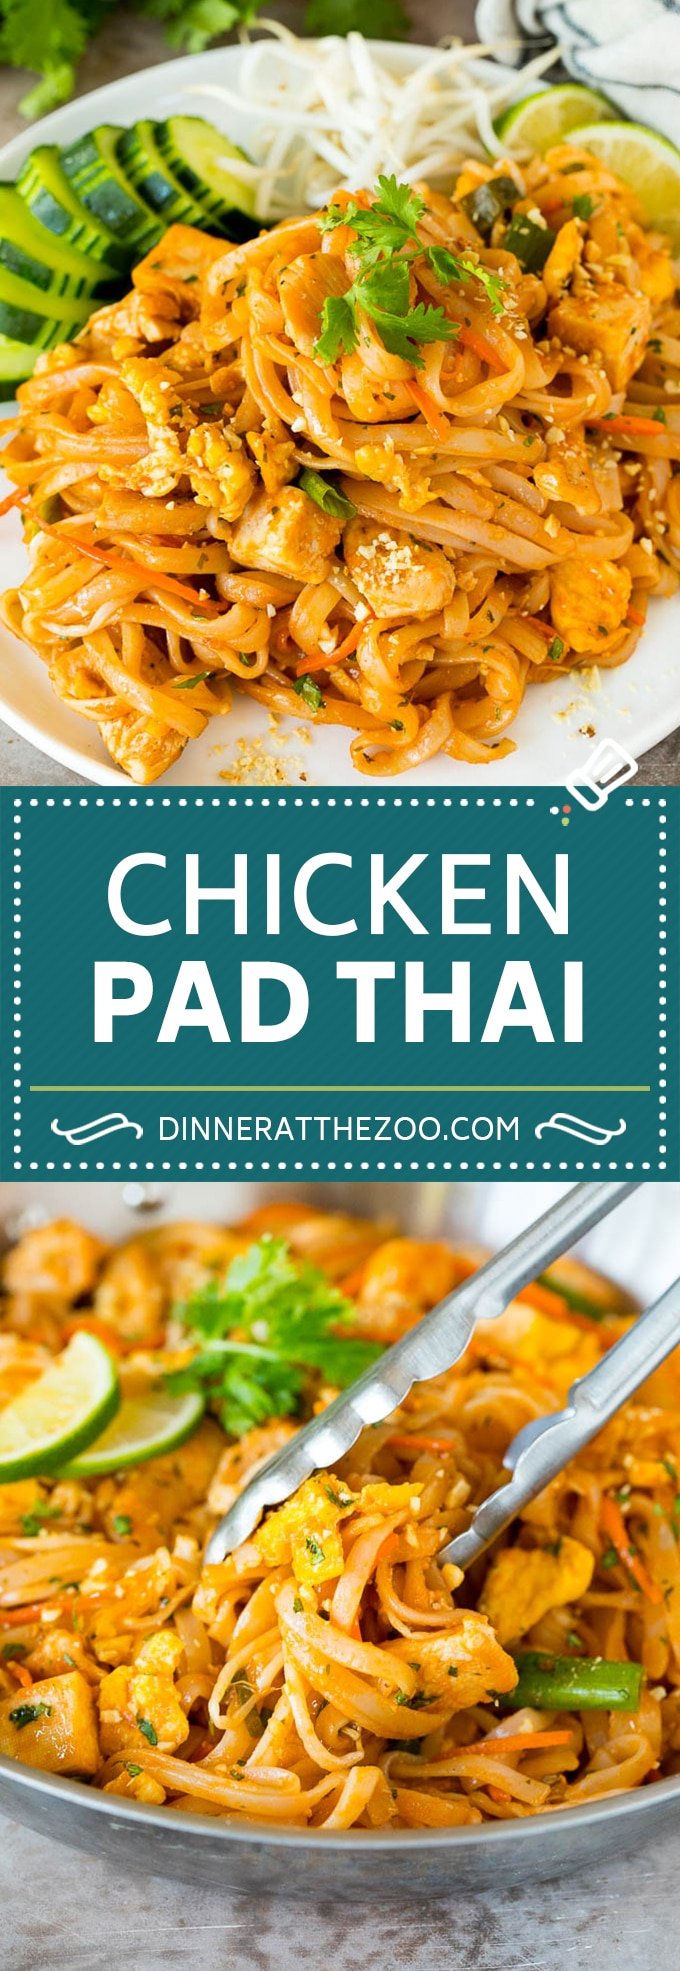 This chicken pad thai is rice noodles tossed with tofu, sliced chicken, veggies and egg, all in a savory sauce.